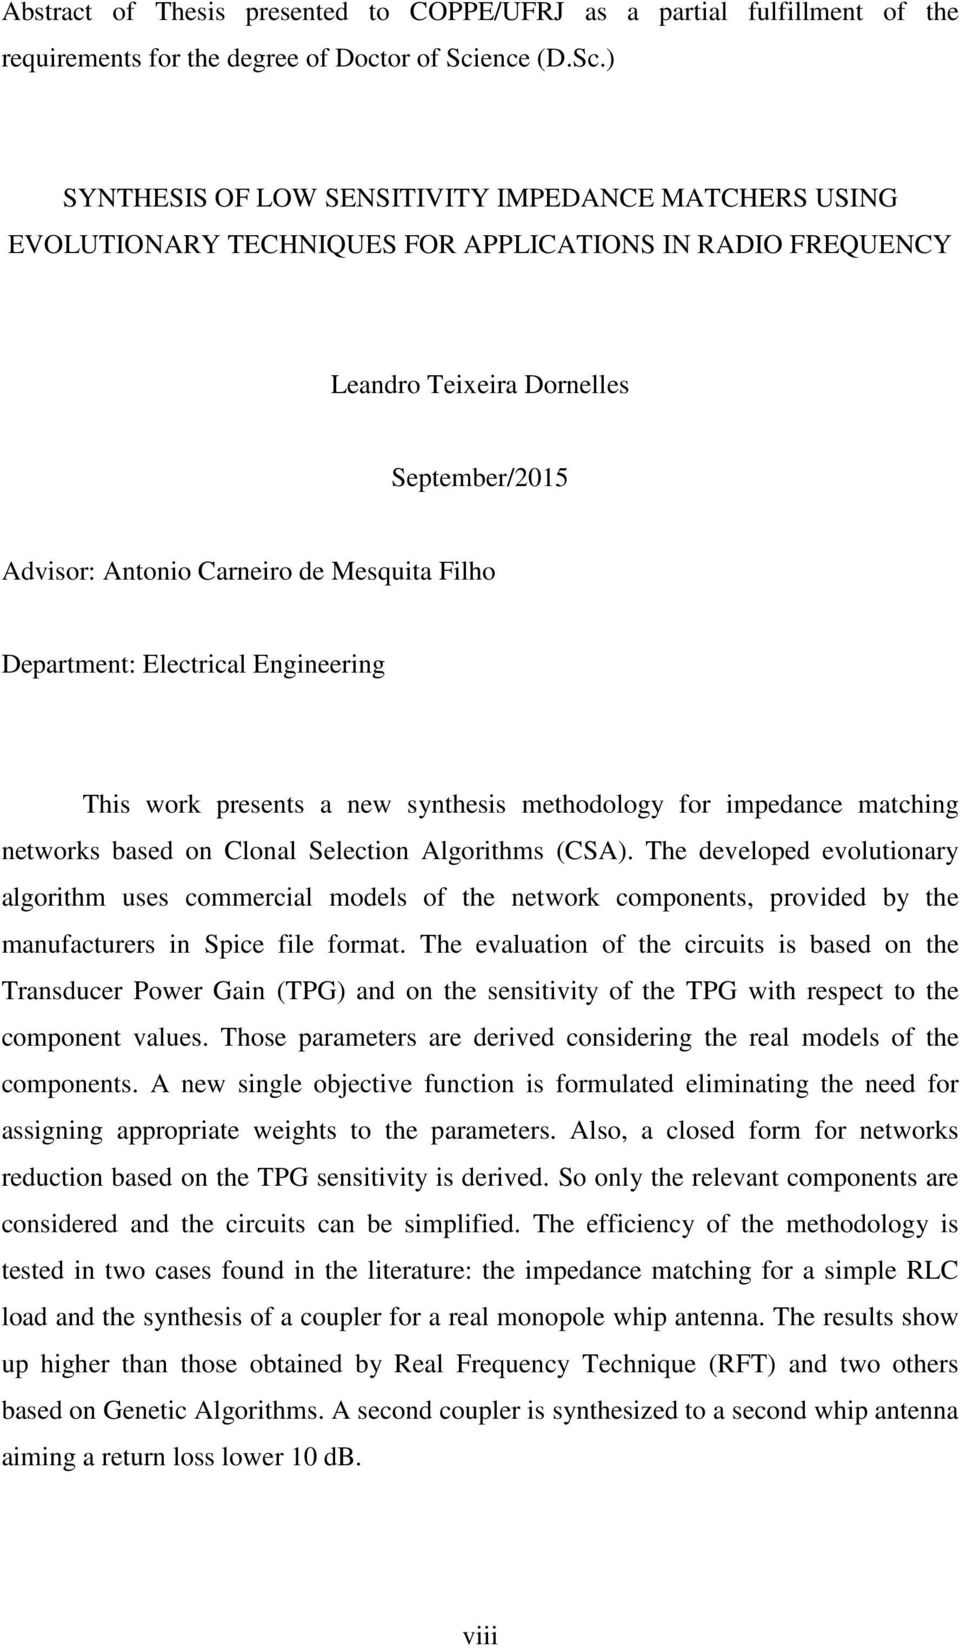 ) SYNTHESIS OF LOW SENSITIVITY IMPEDANCE MATCHERS USING EVOLUTIONARY TECHNIQUES FOR APPLICATIONS IN RADIO FREQUENCY Leandro Texera Dornelles September/205 Advsor: Antono Carnero de Mesquta Flho